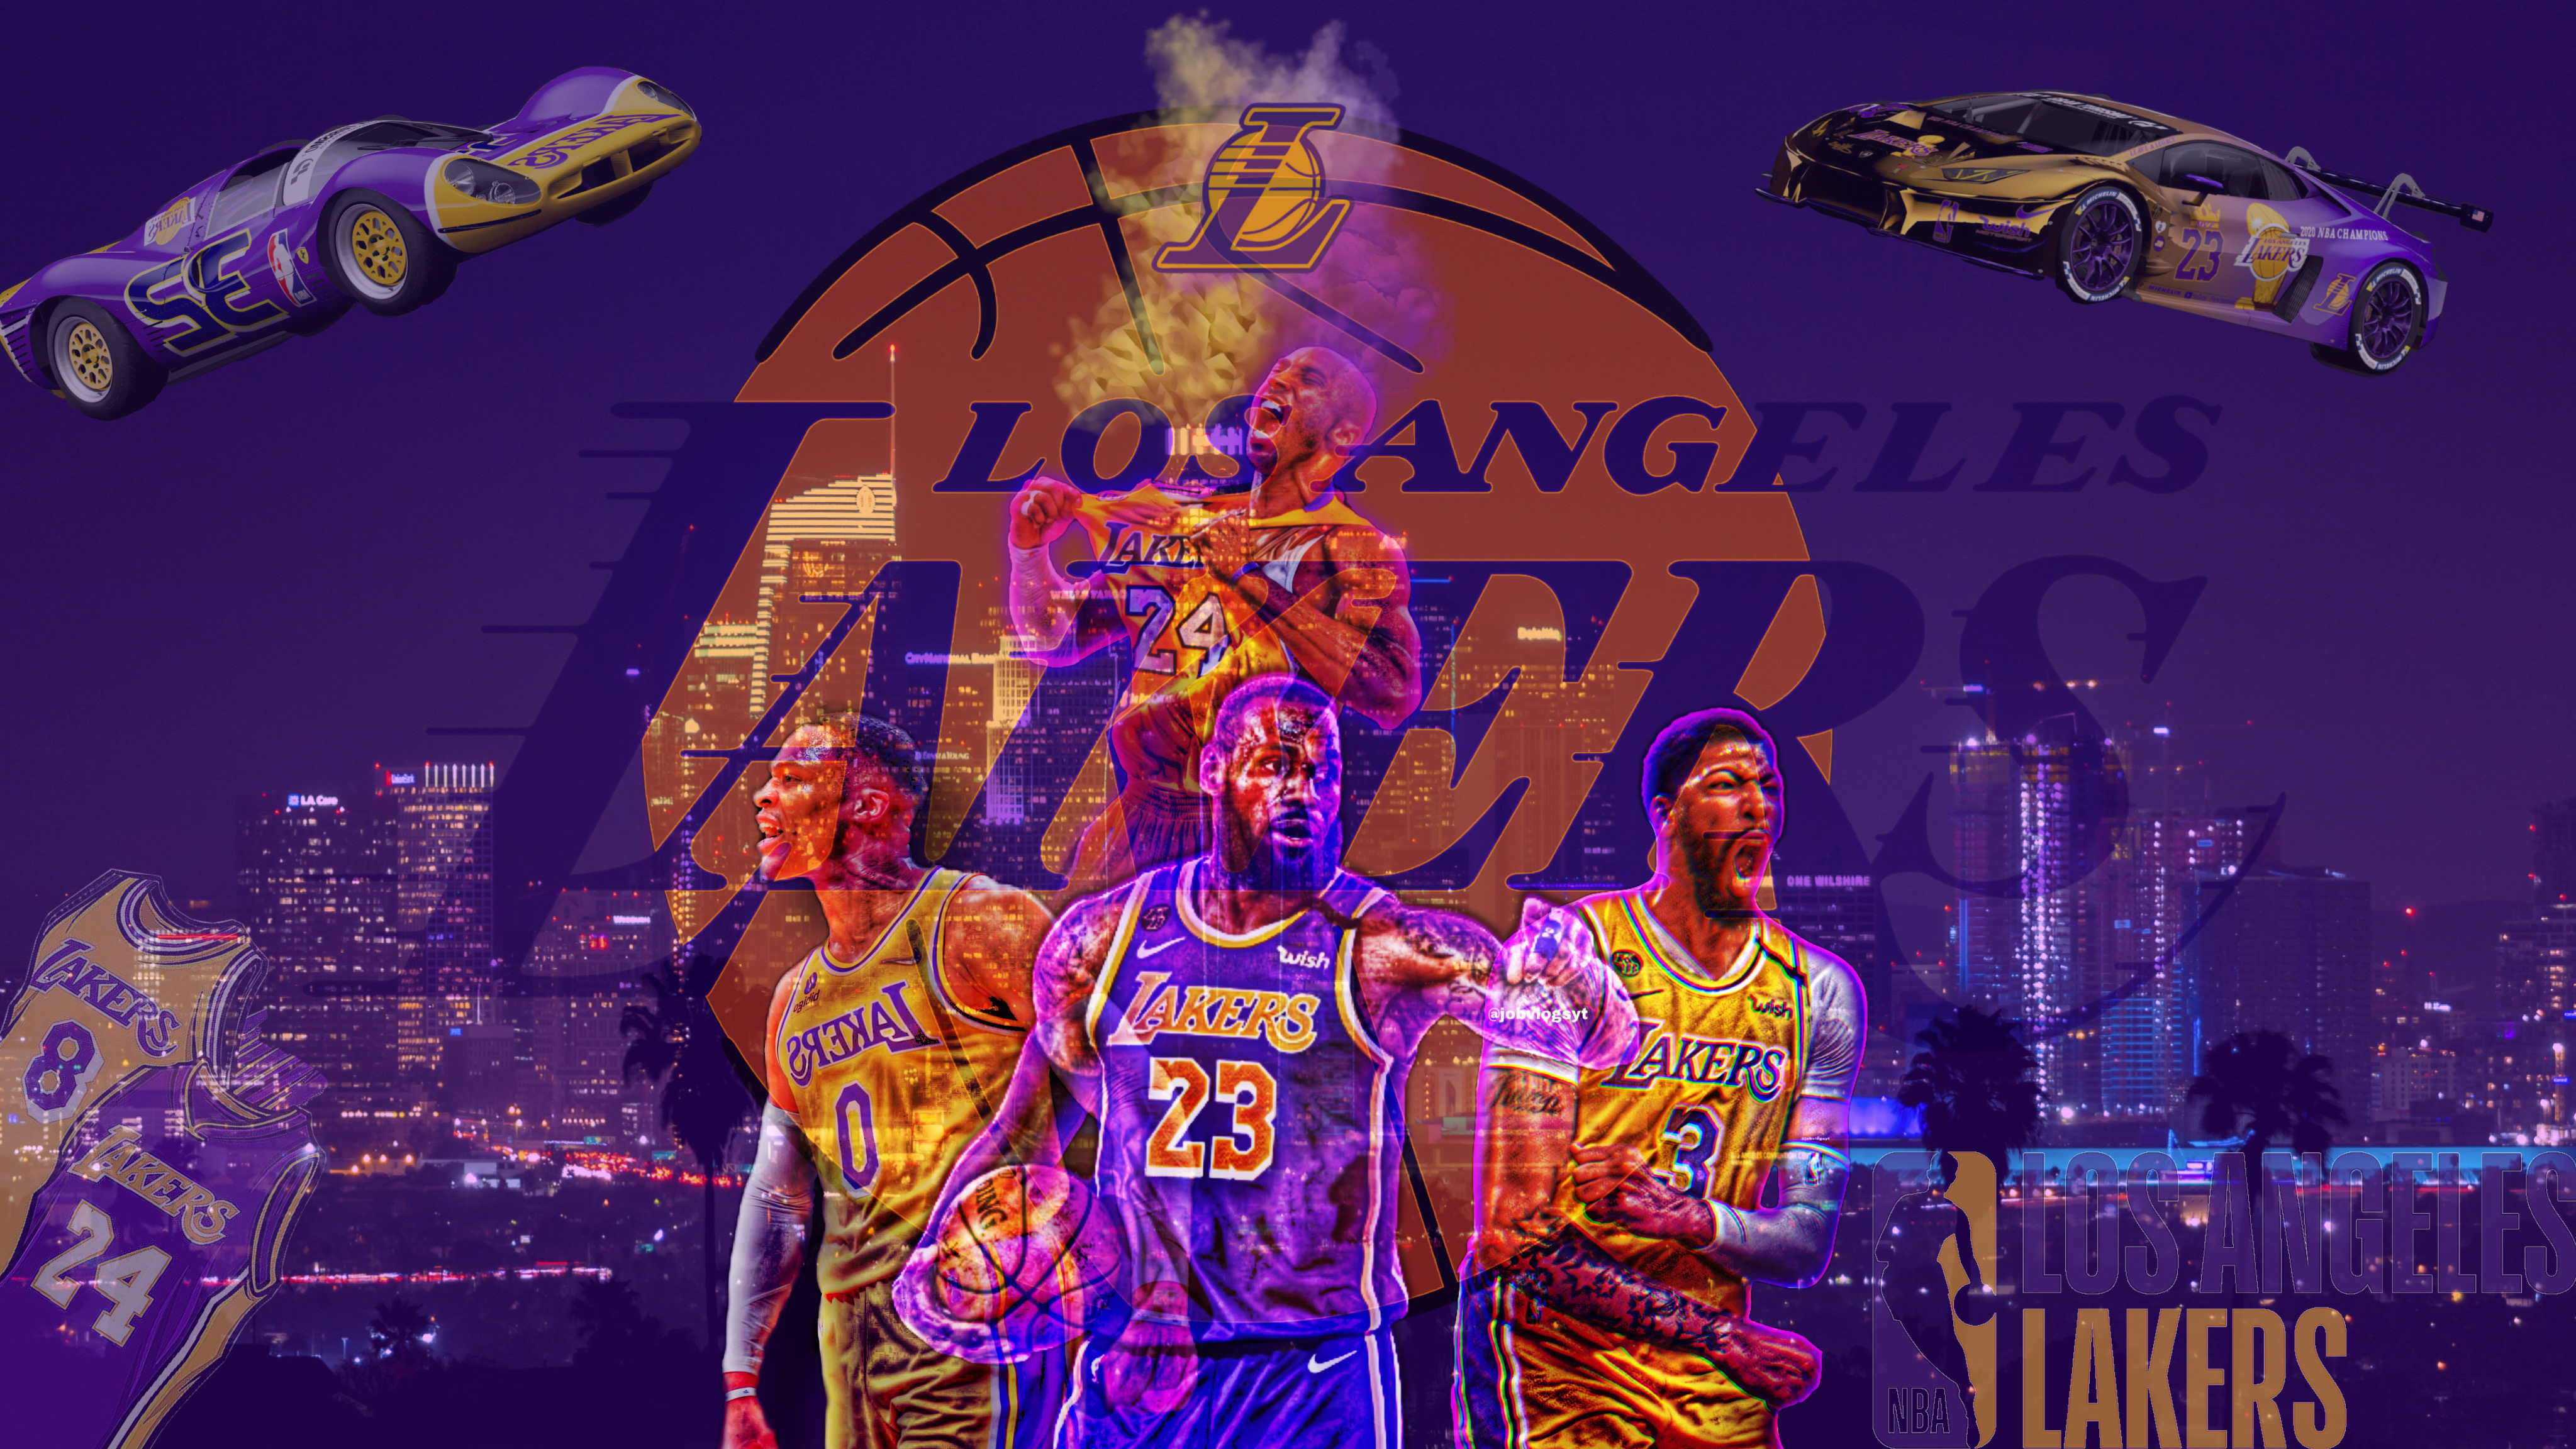 Los Angeles Lakers Wallpapers